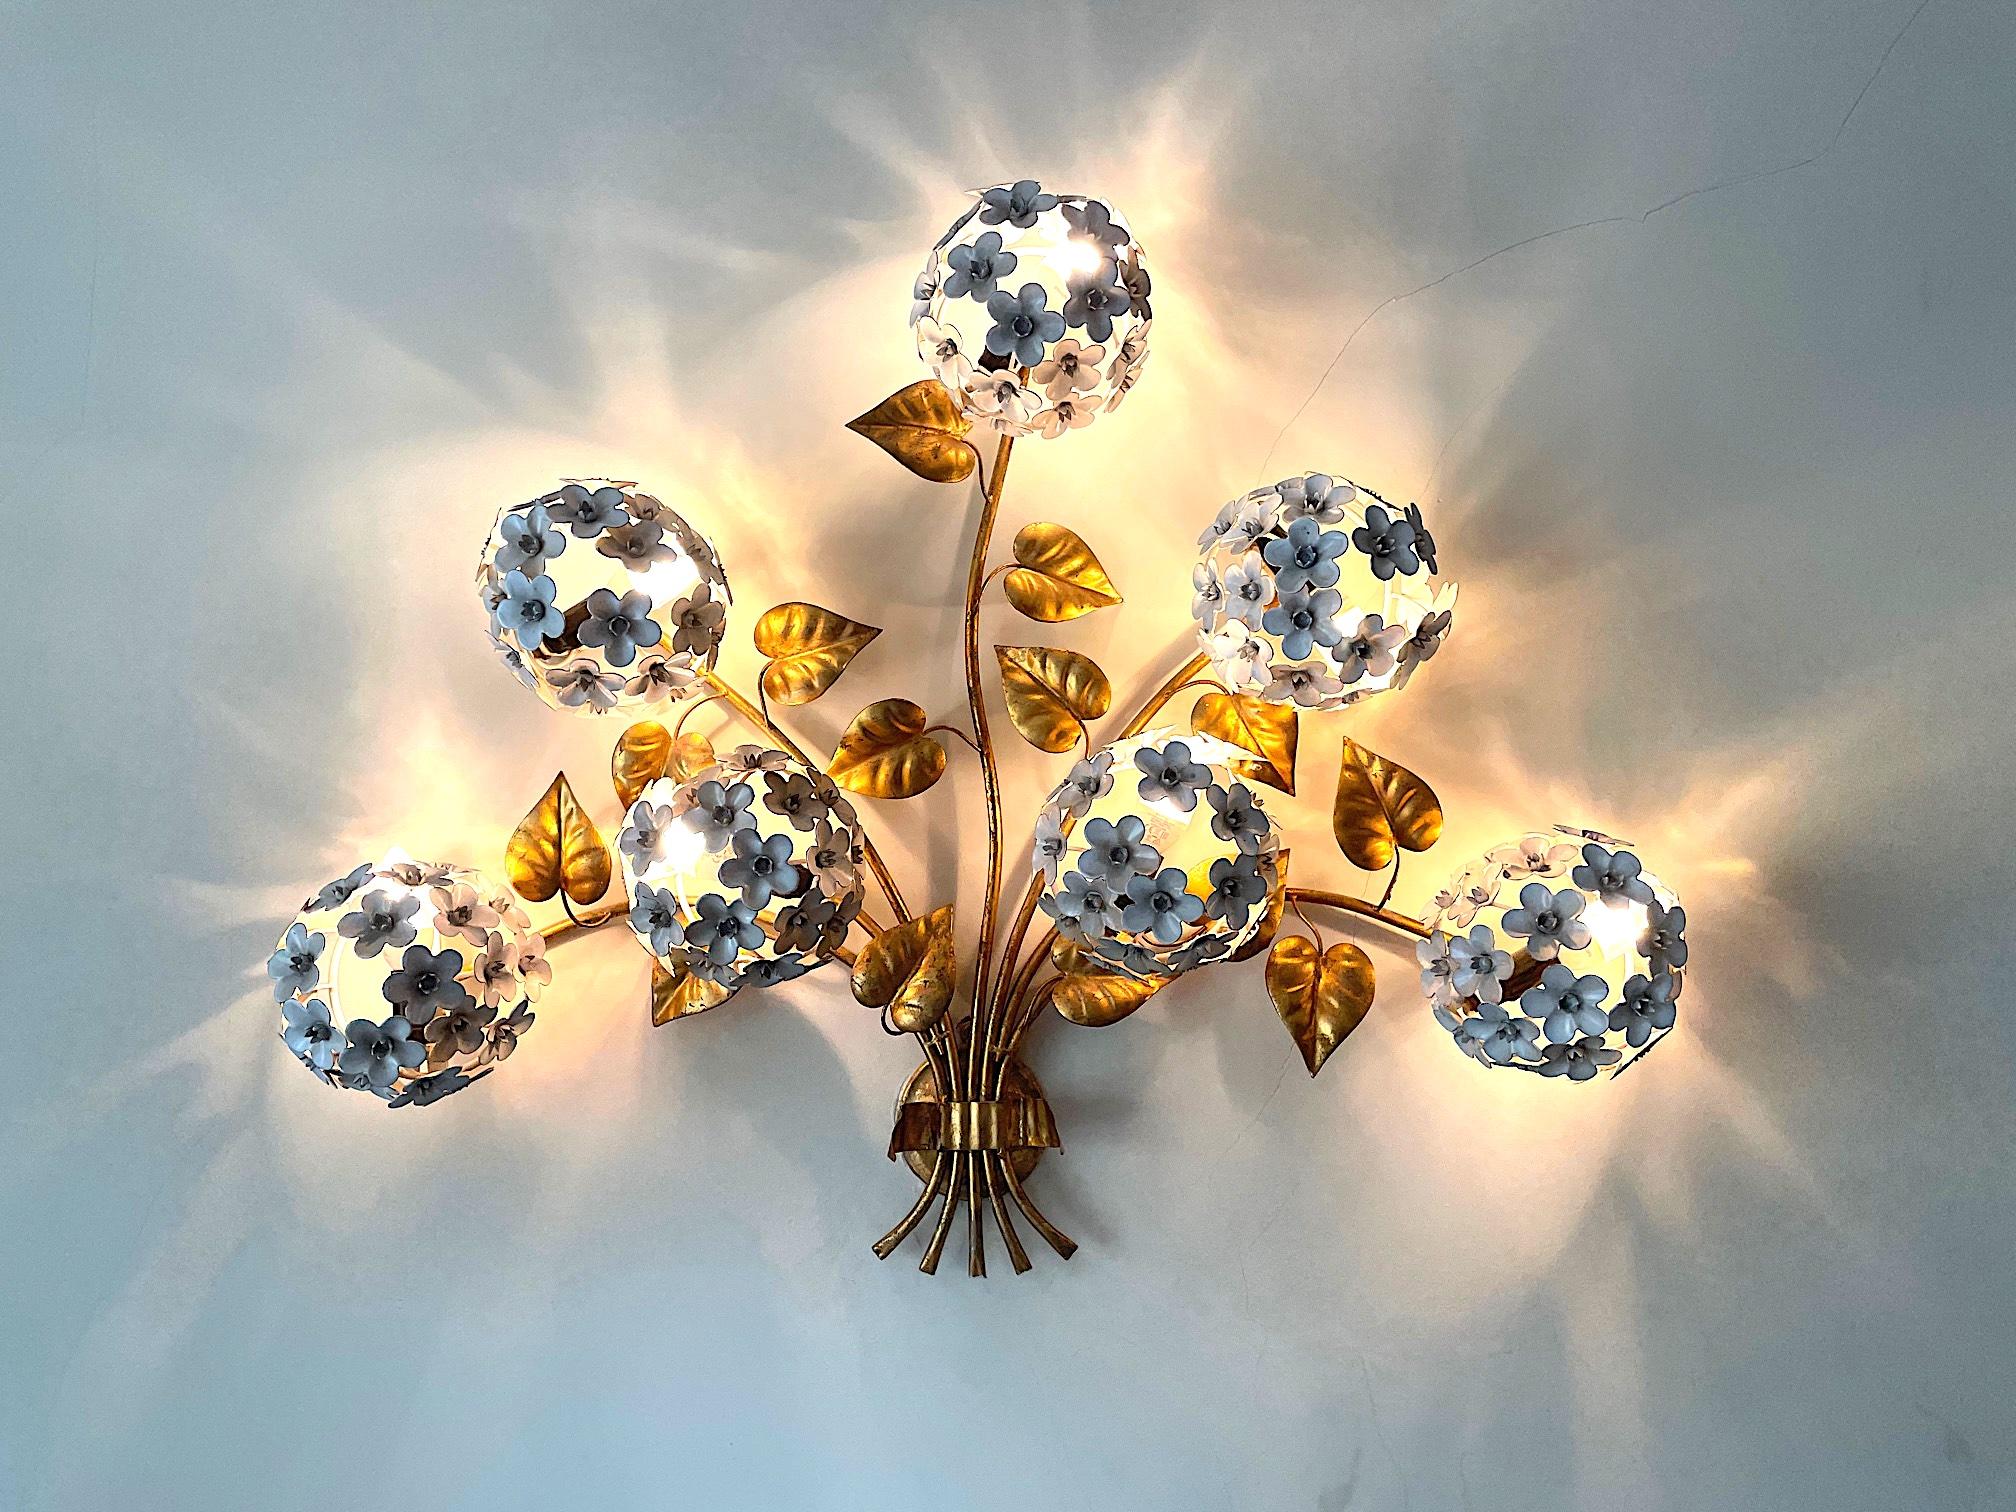 Enameled Wonderful 1950s Hydrangea Wall Light with Seven Lights Behind the Flowers